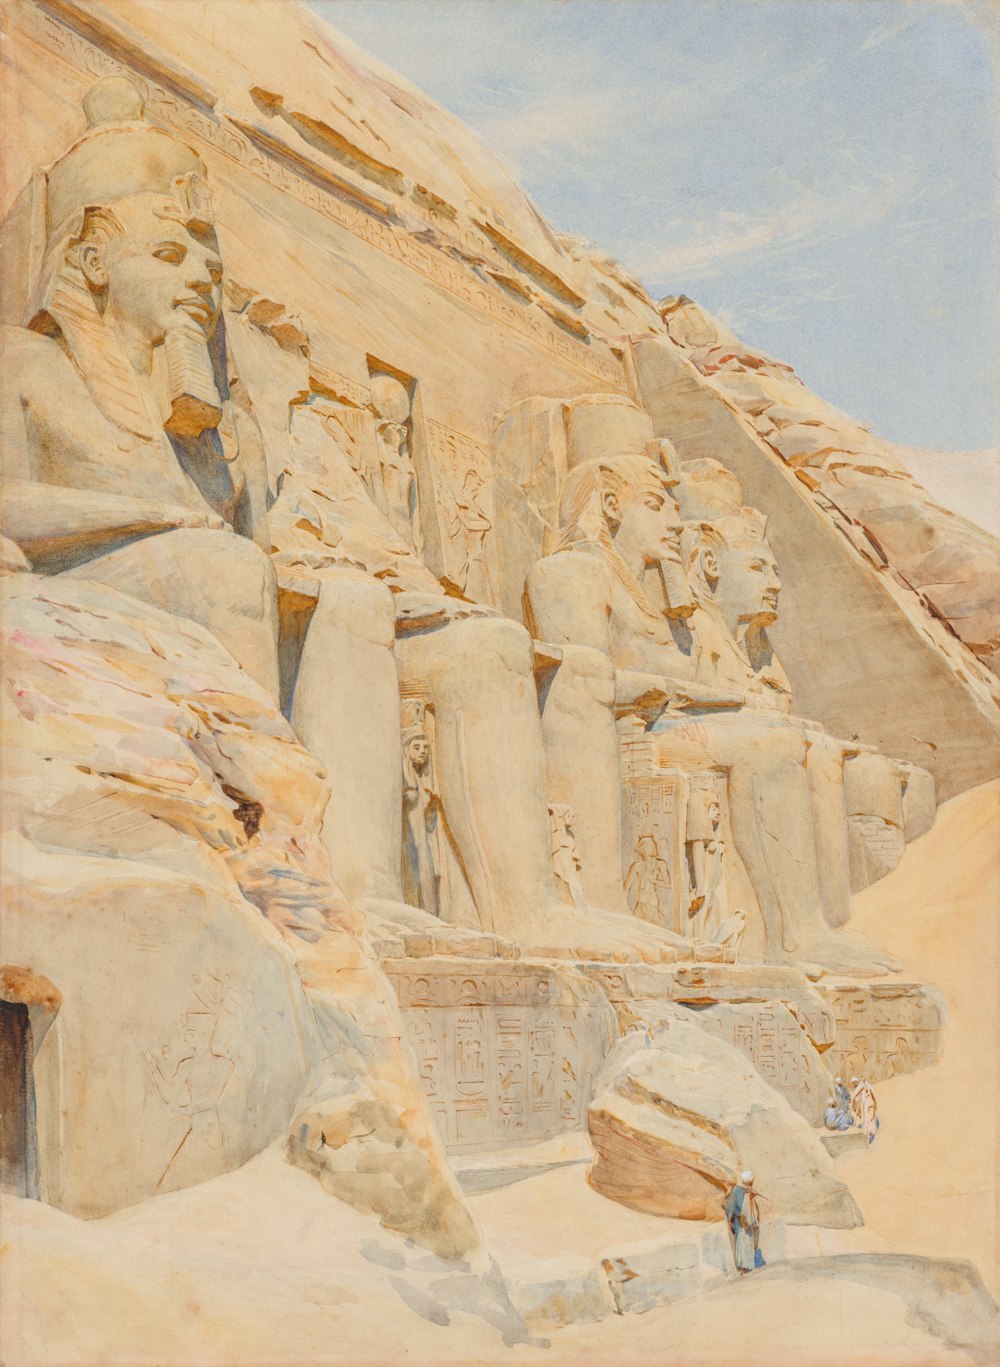 a painting of a group of statues in the desert